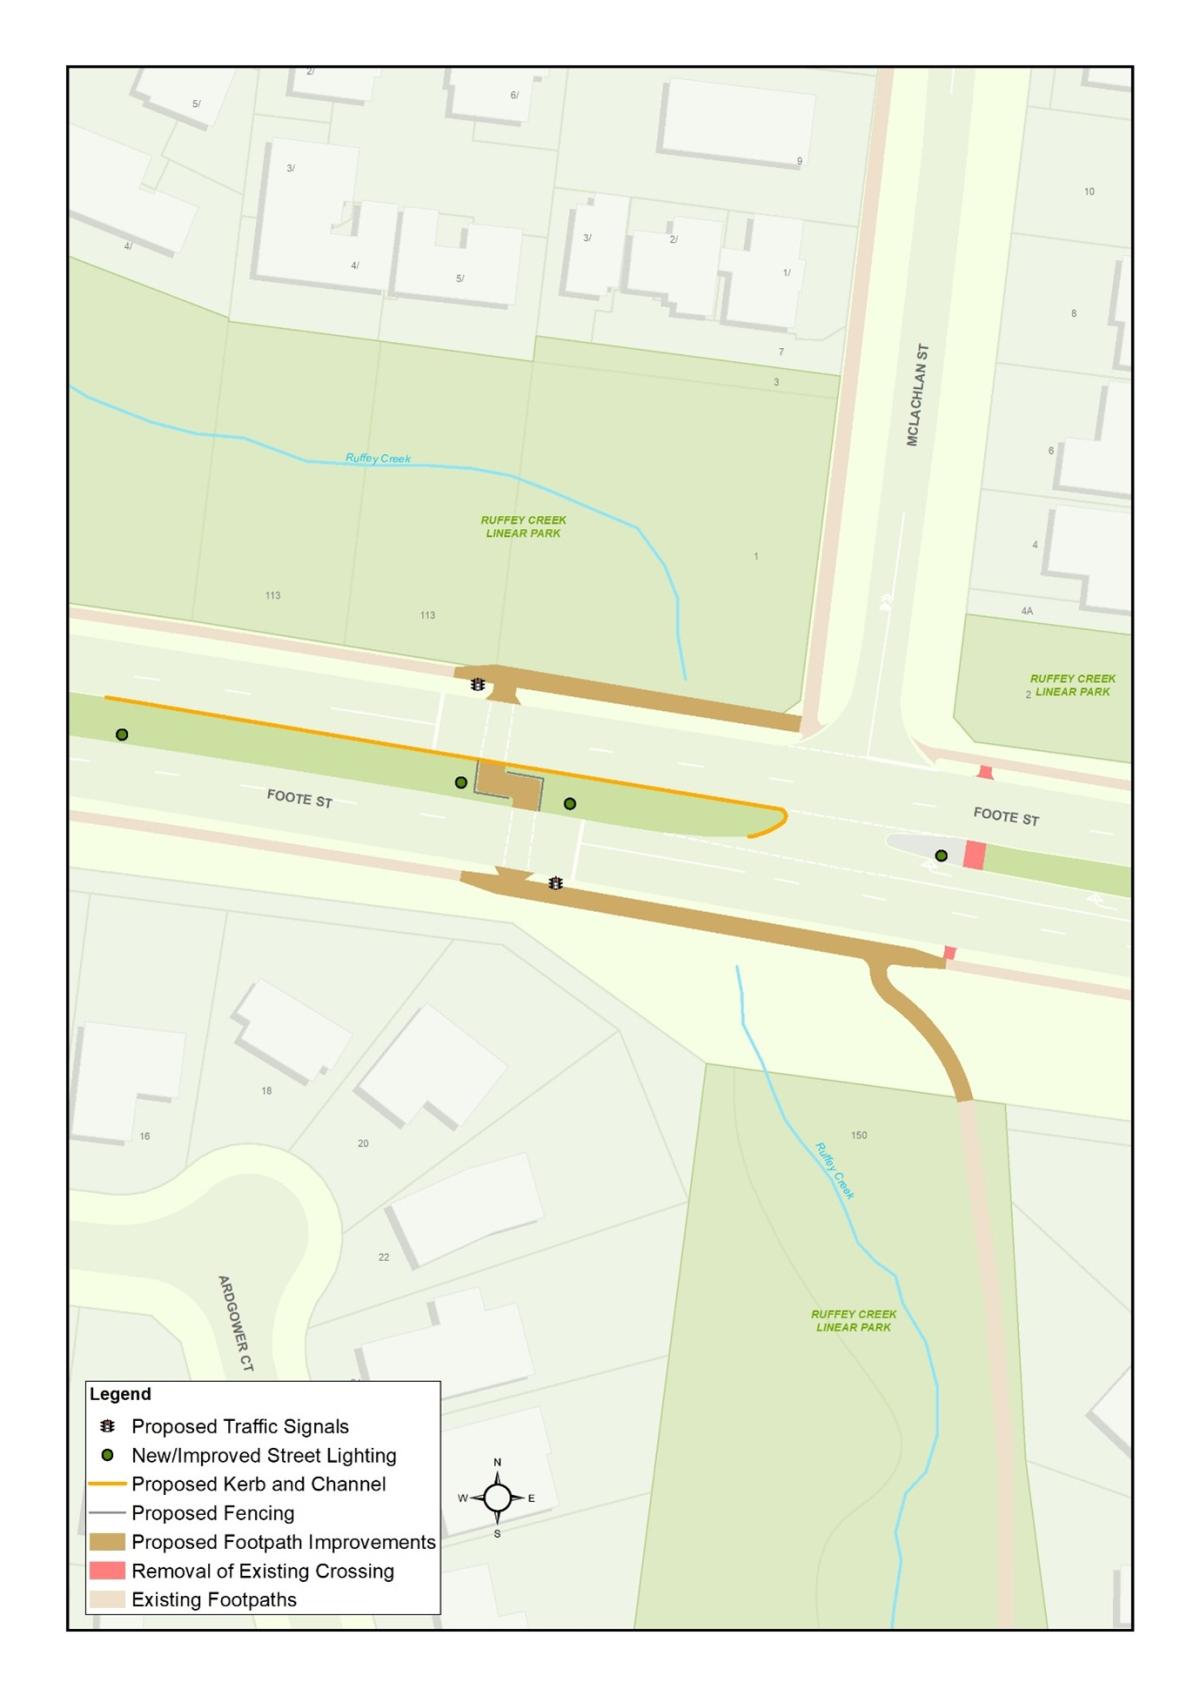 Map of Foote Street Templestowe, where the construction works will occur